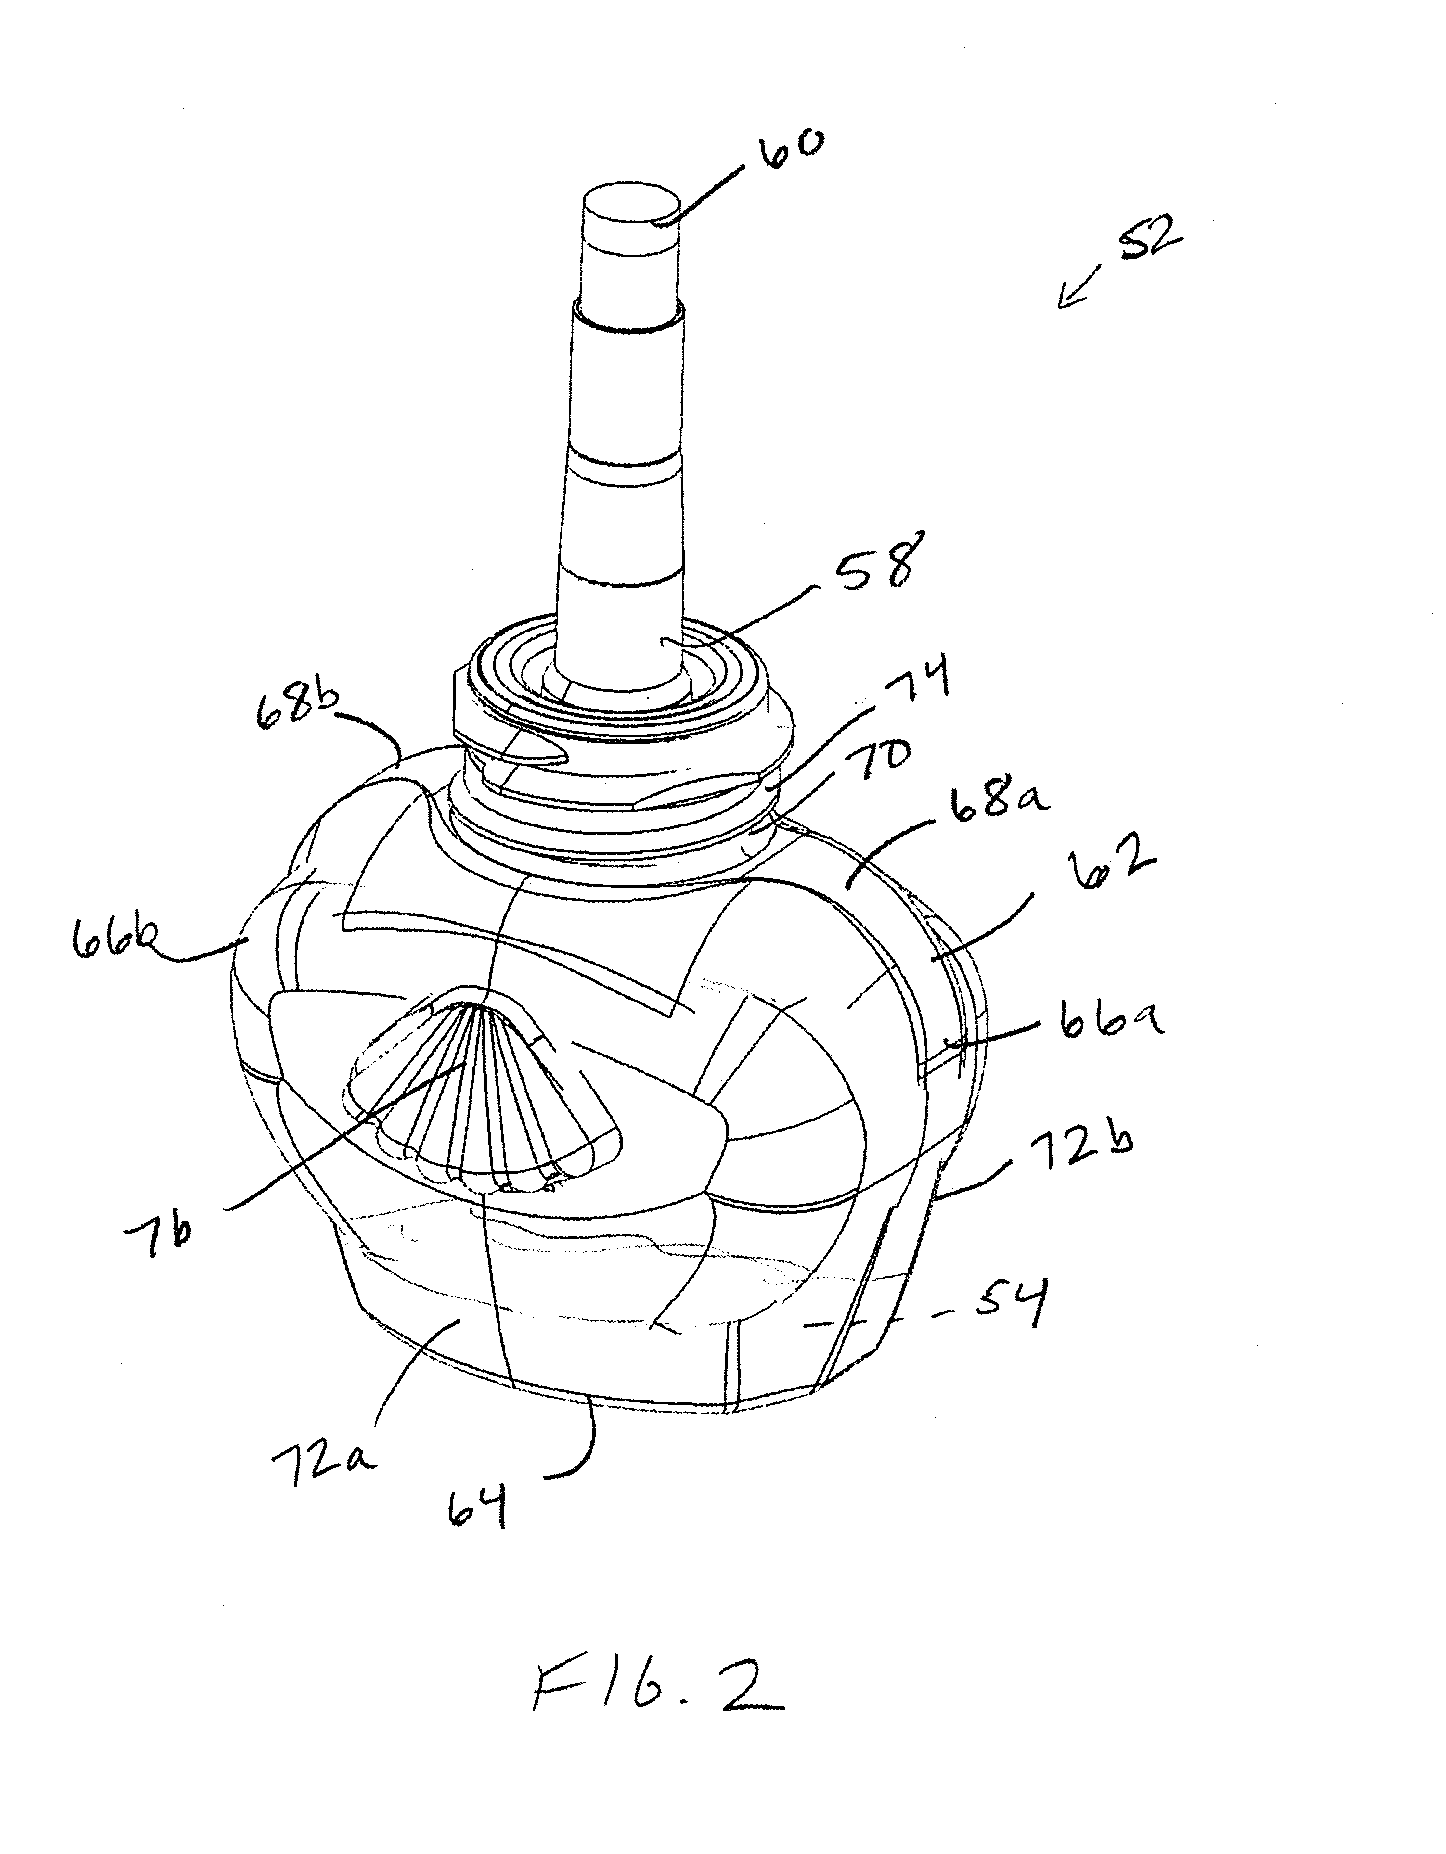 Rotating Electrical Plug Assembly for Volatile Material Dispenser